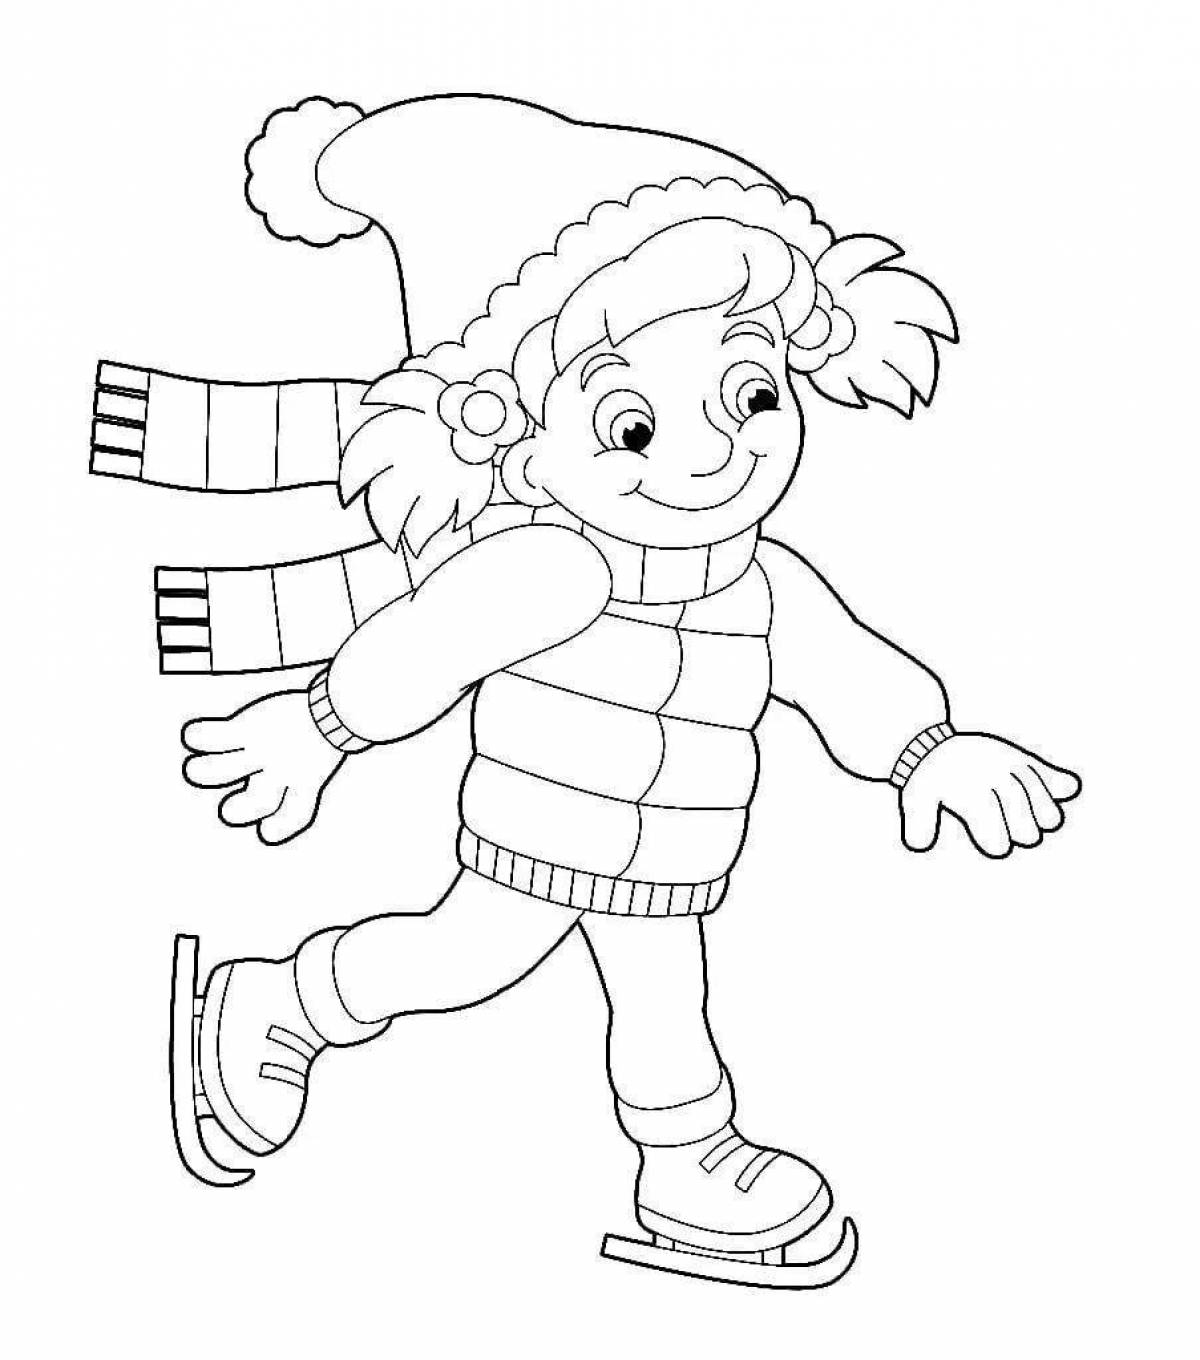 Coloring page charming girl on skates